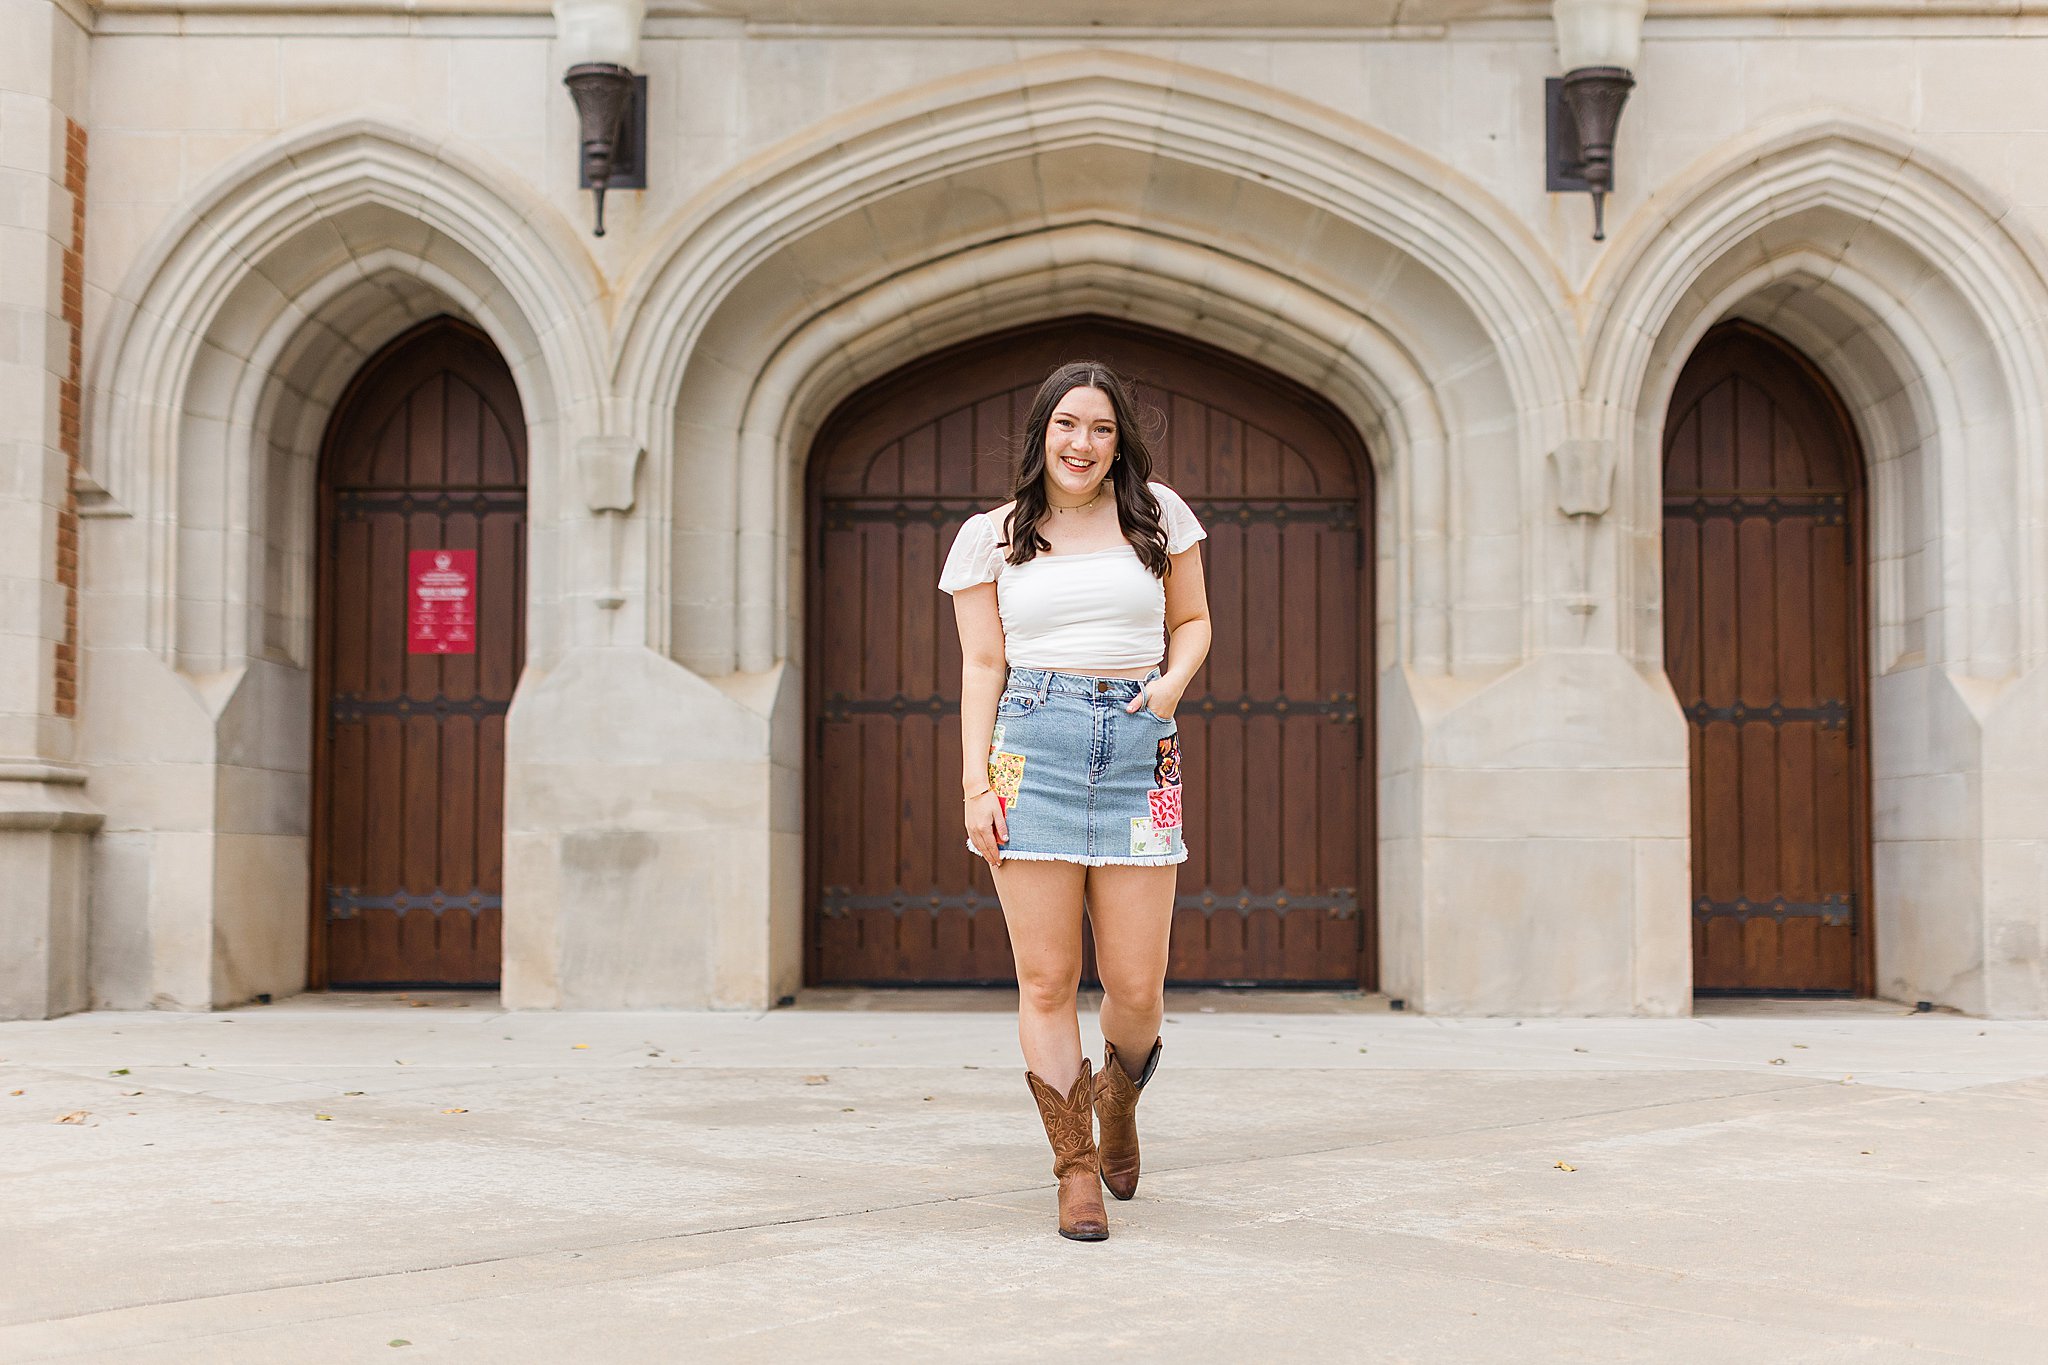 graduation portraits in the spring at ou